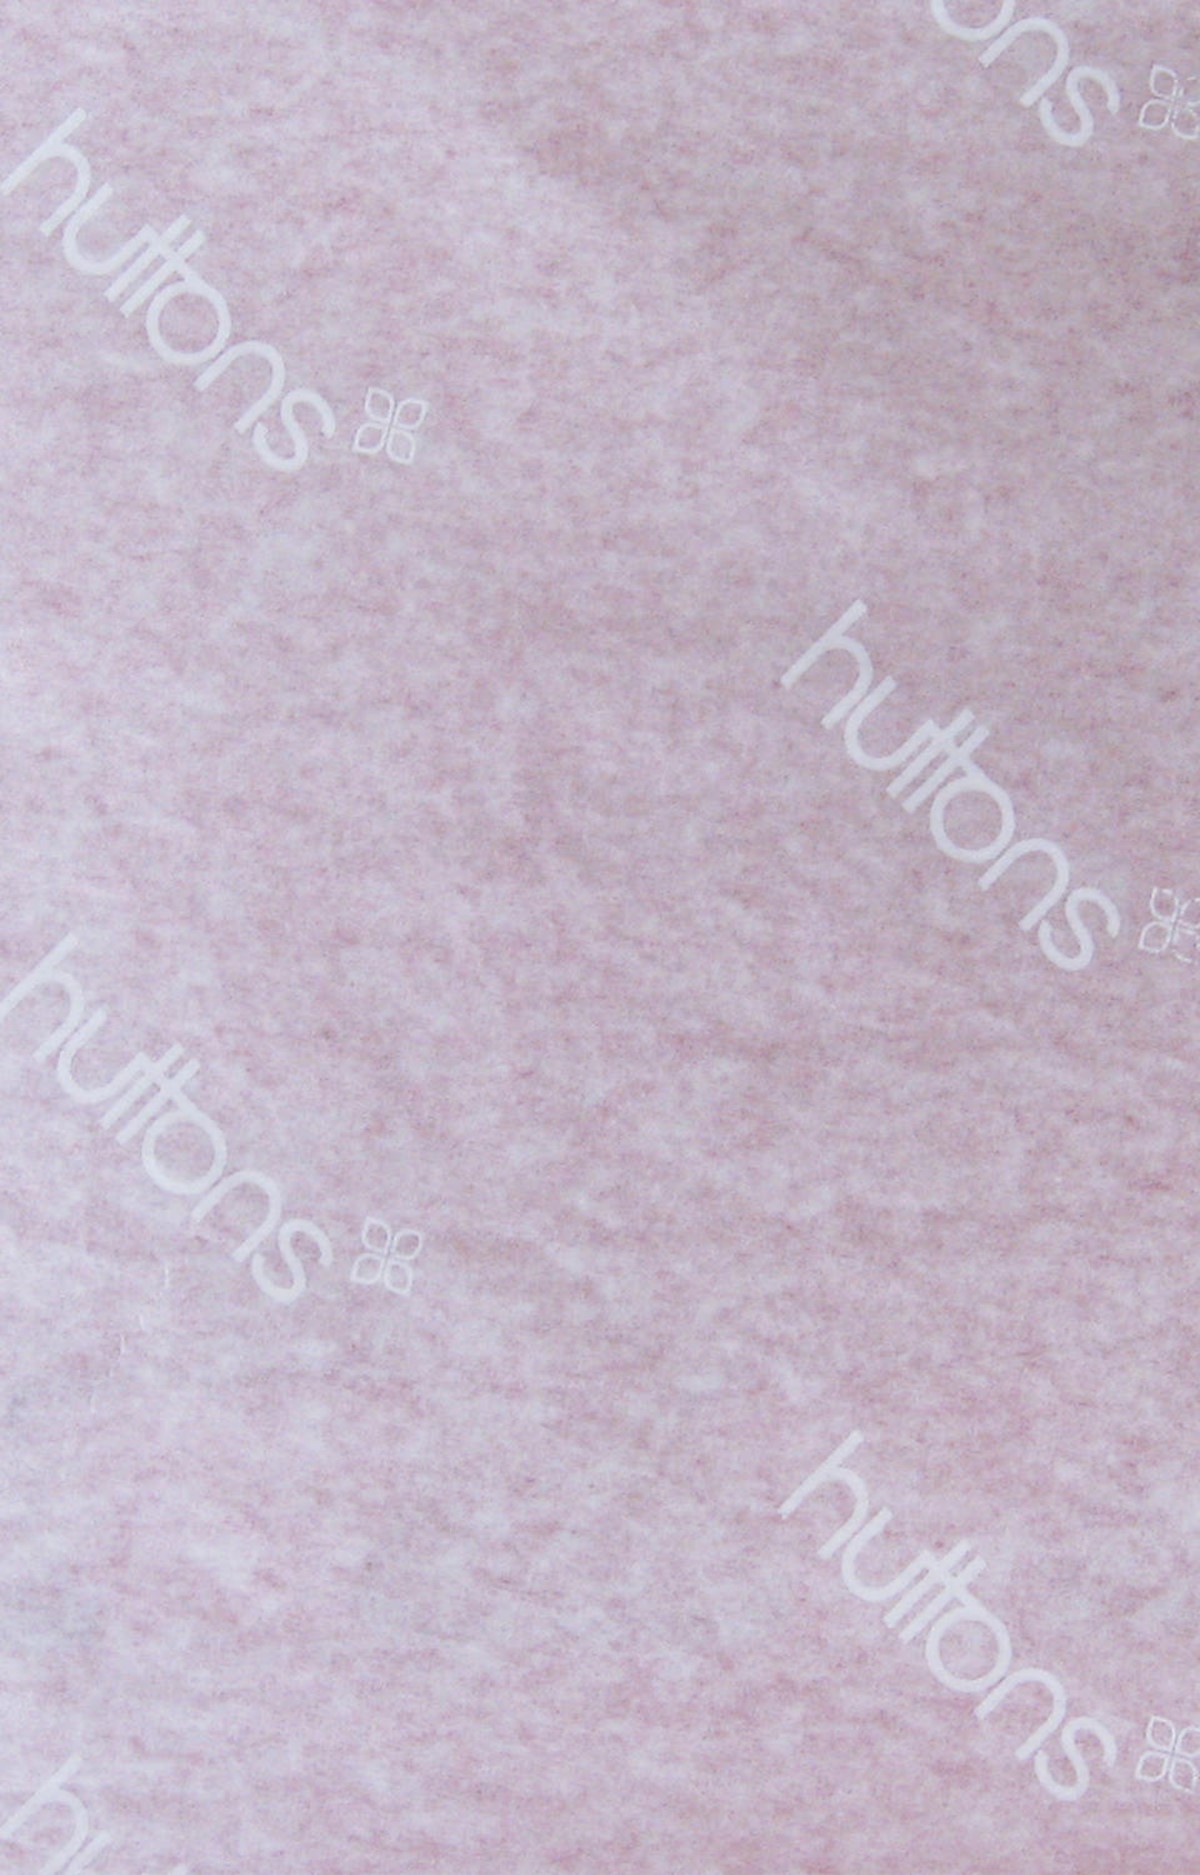 Huttons. Retail identity - branded packaging tissue paper. Brand identity design by Superfried.